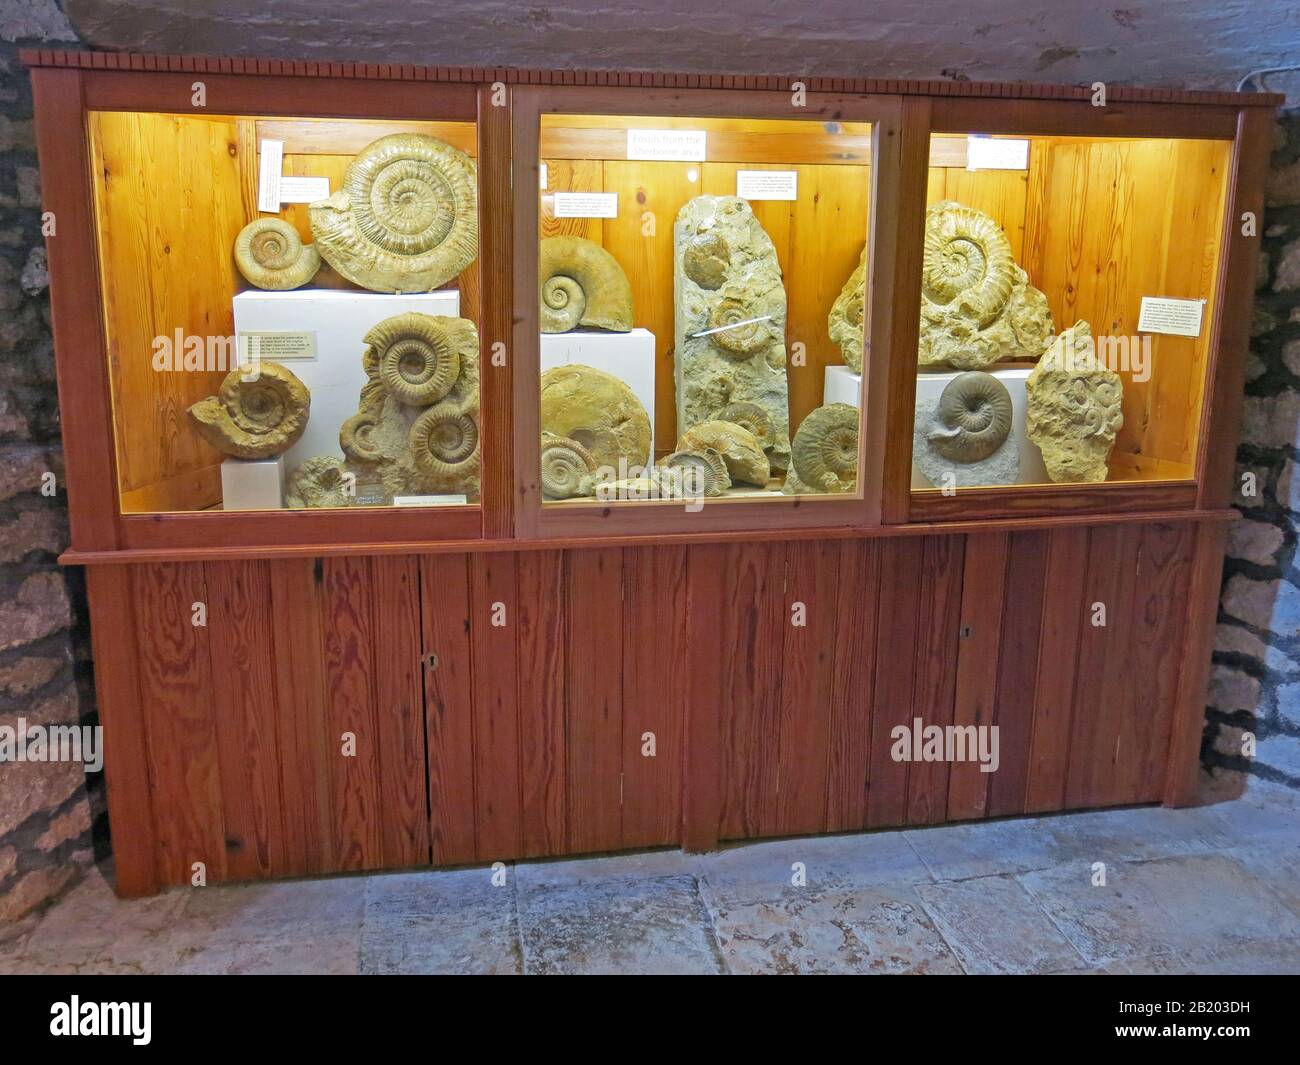 An impressive display of ammonites and other fossils in the cellars of Sherborne 'New' Castle of 1594, Sherborne, Dorset, England, UK Stock Photo